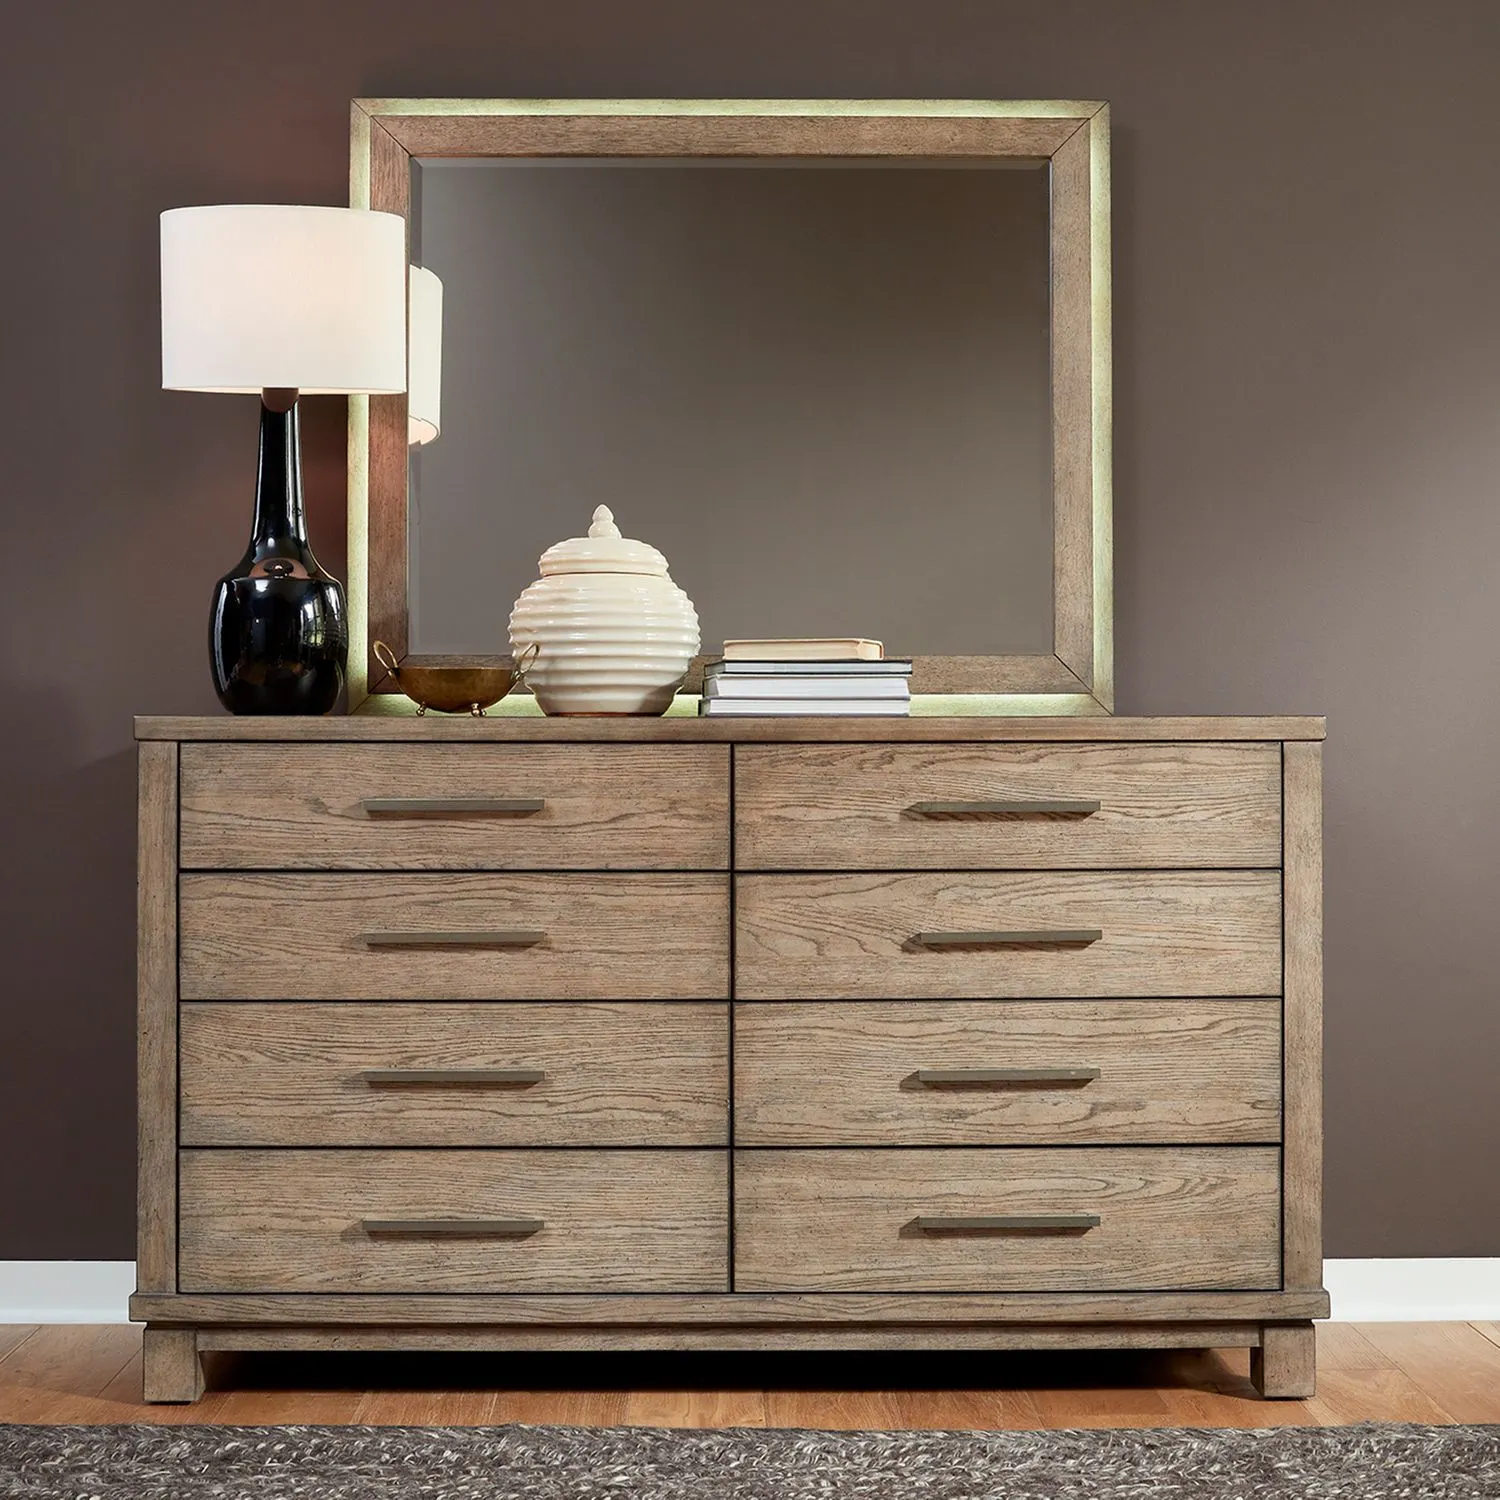 QUEEN UPHOLSTERED BED DRESSER MIRROR CHEST - CANYON ROAD